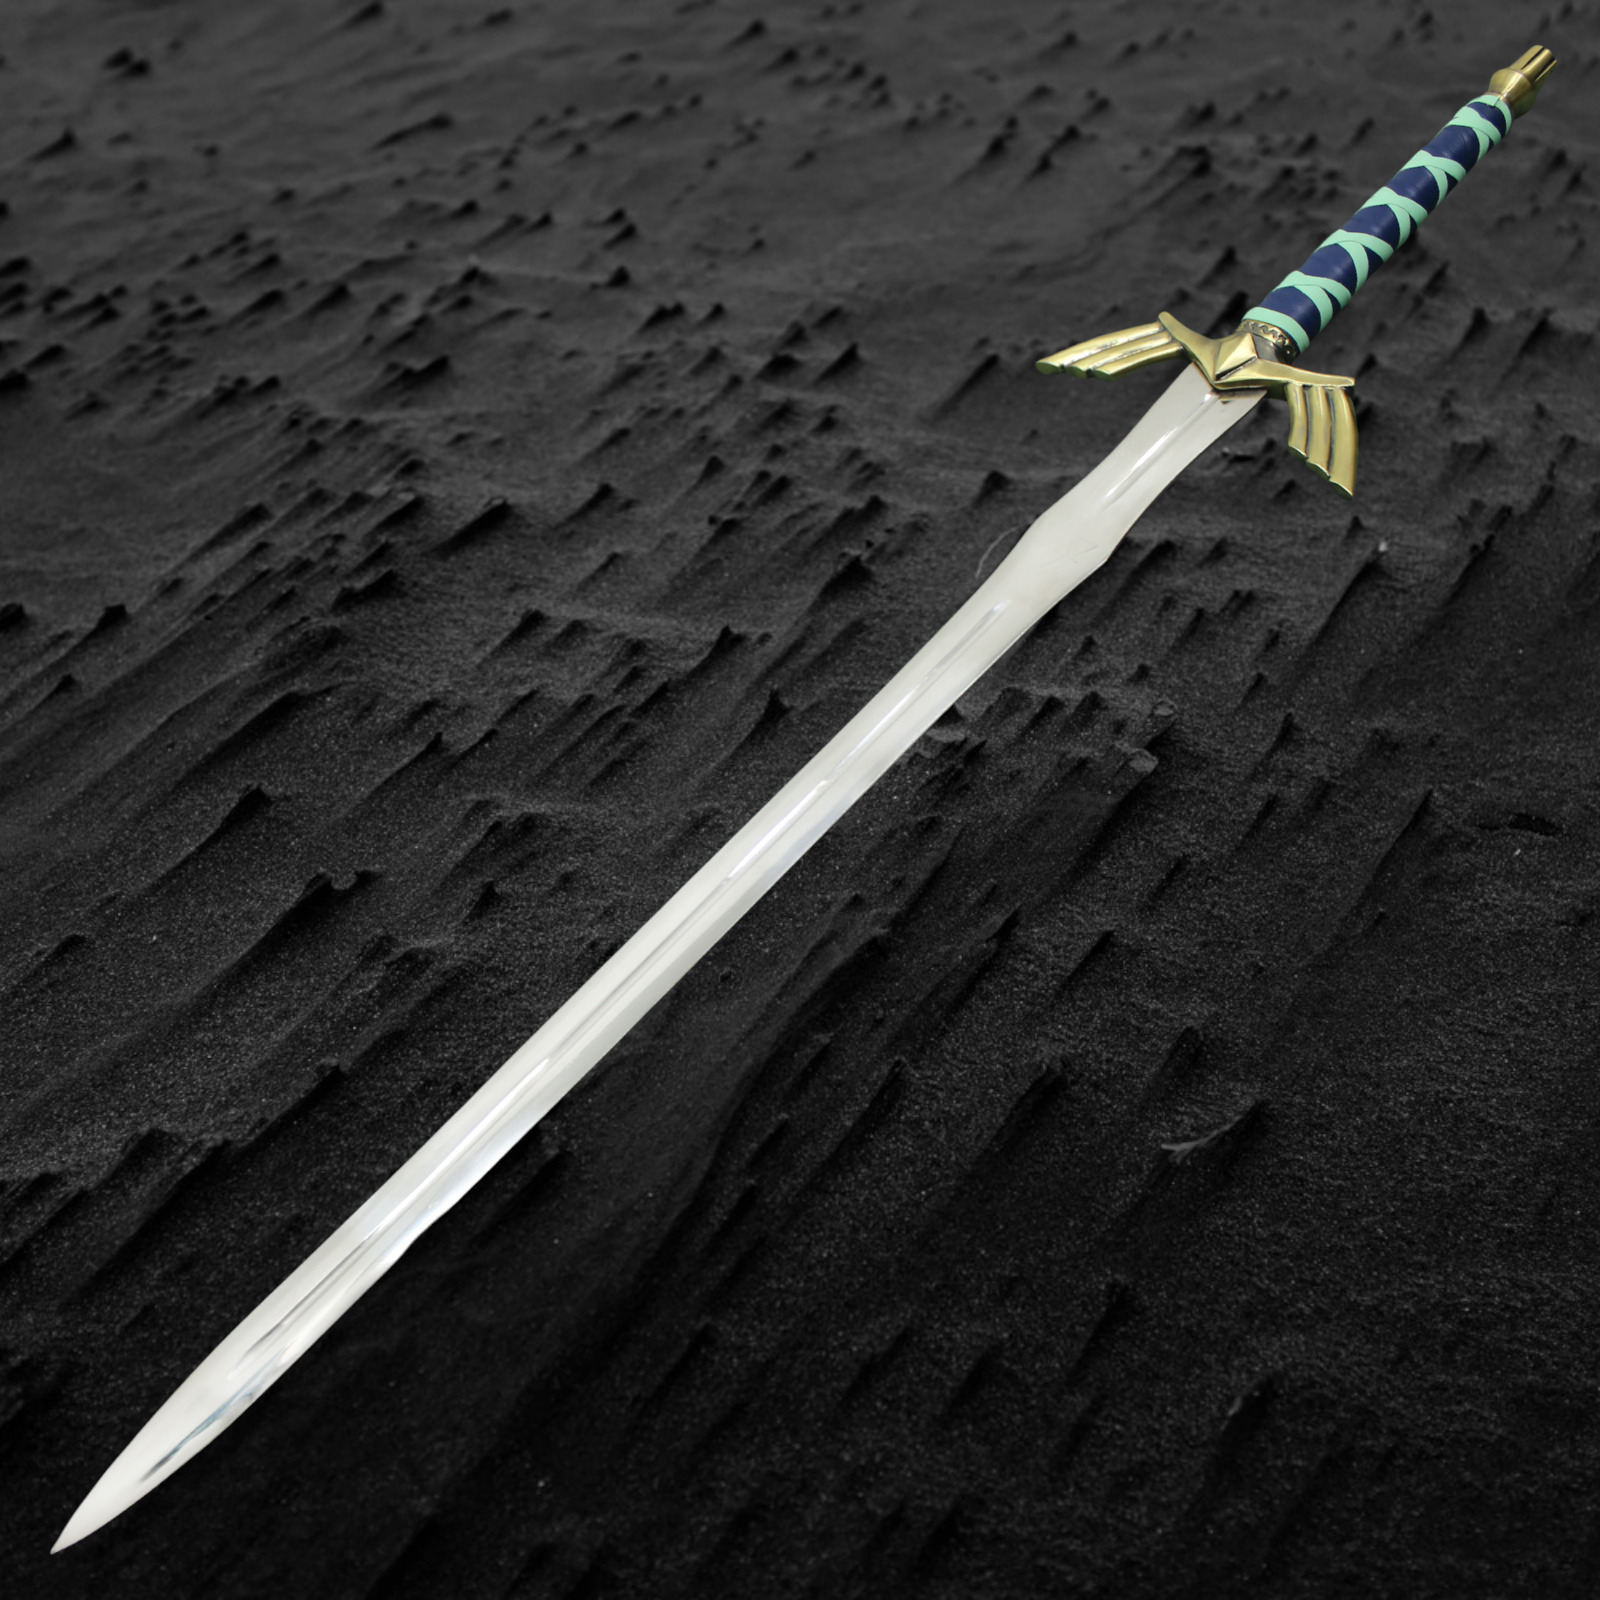 Handmade Legend of Zelda Sword Replica with Leather Sheath (Blue and Gold)